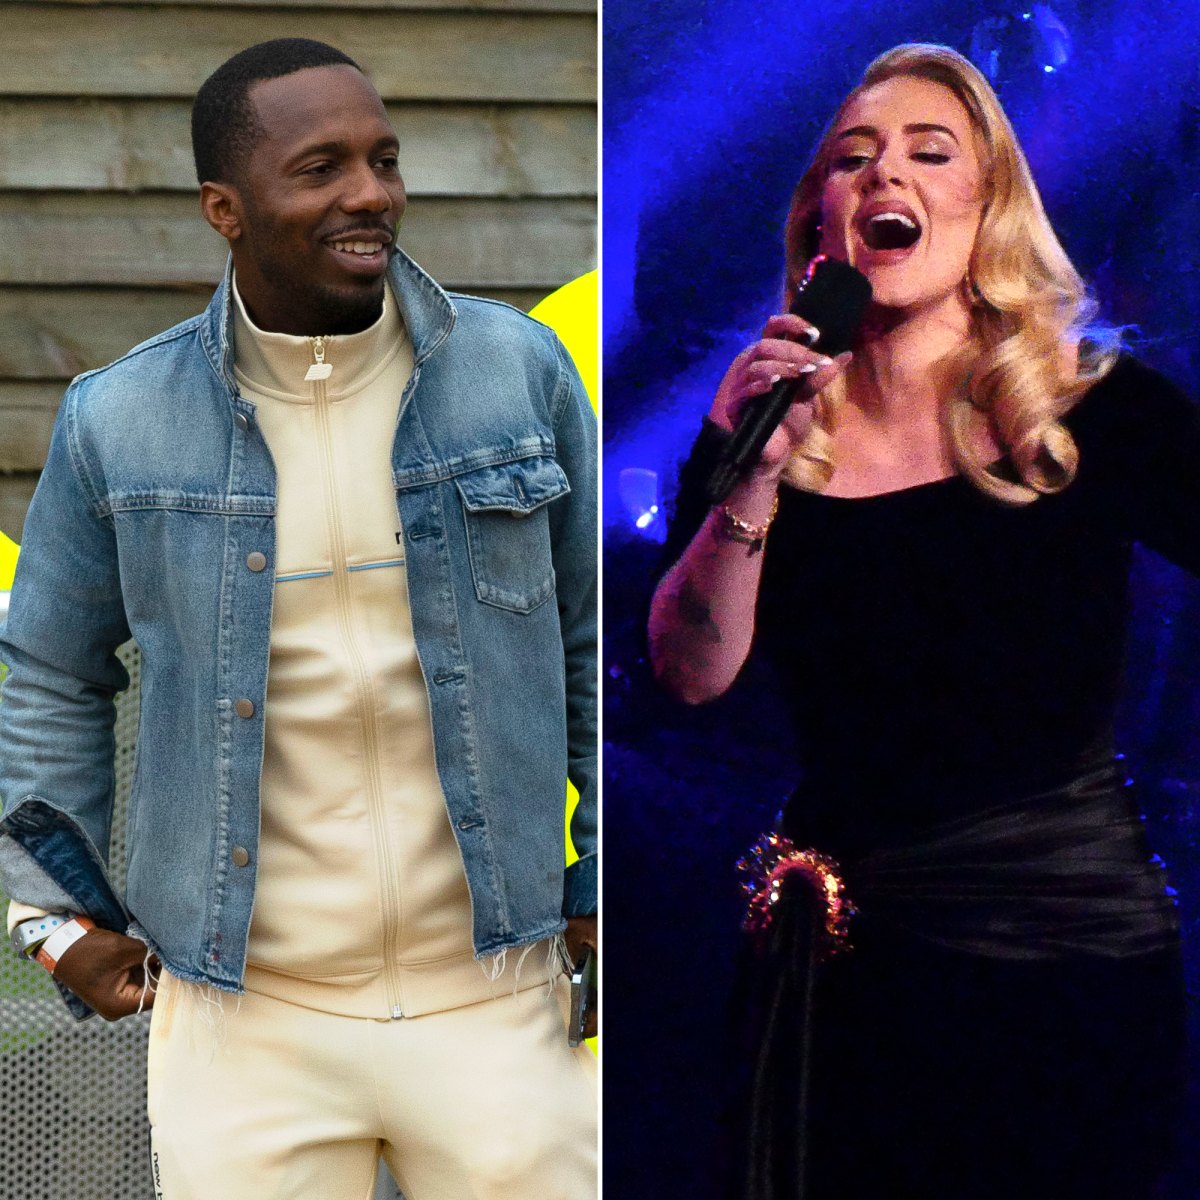 Adele engaged to Rich Paul, plans to marry this year - reports - NZ Herald